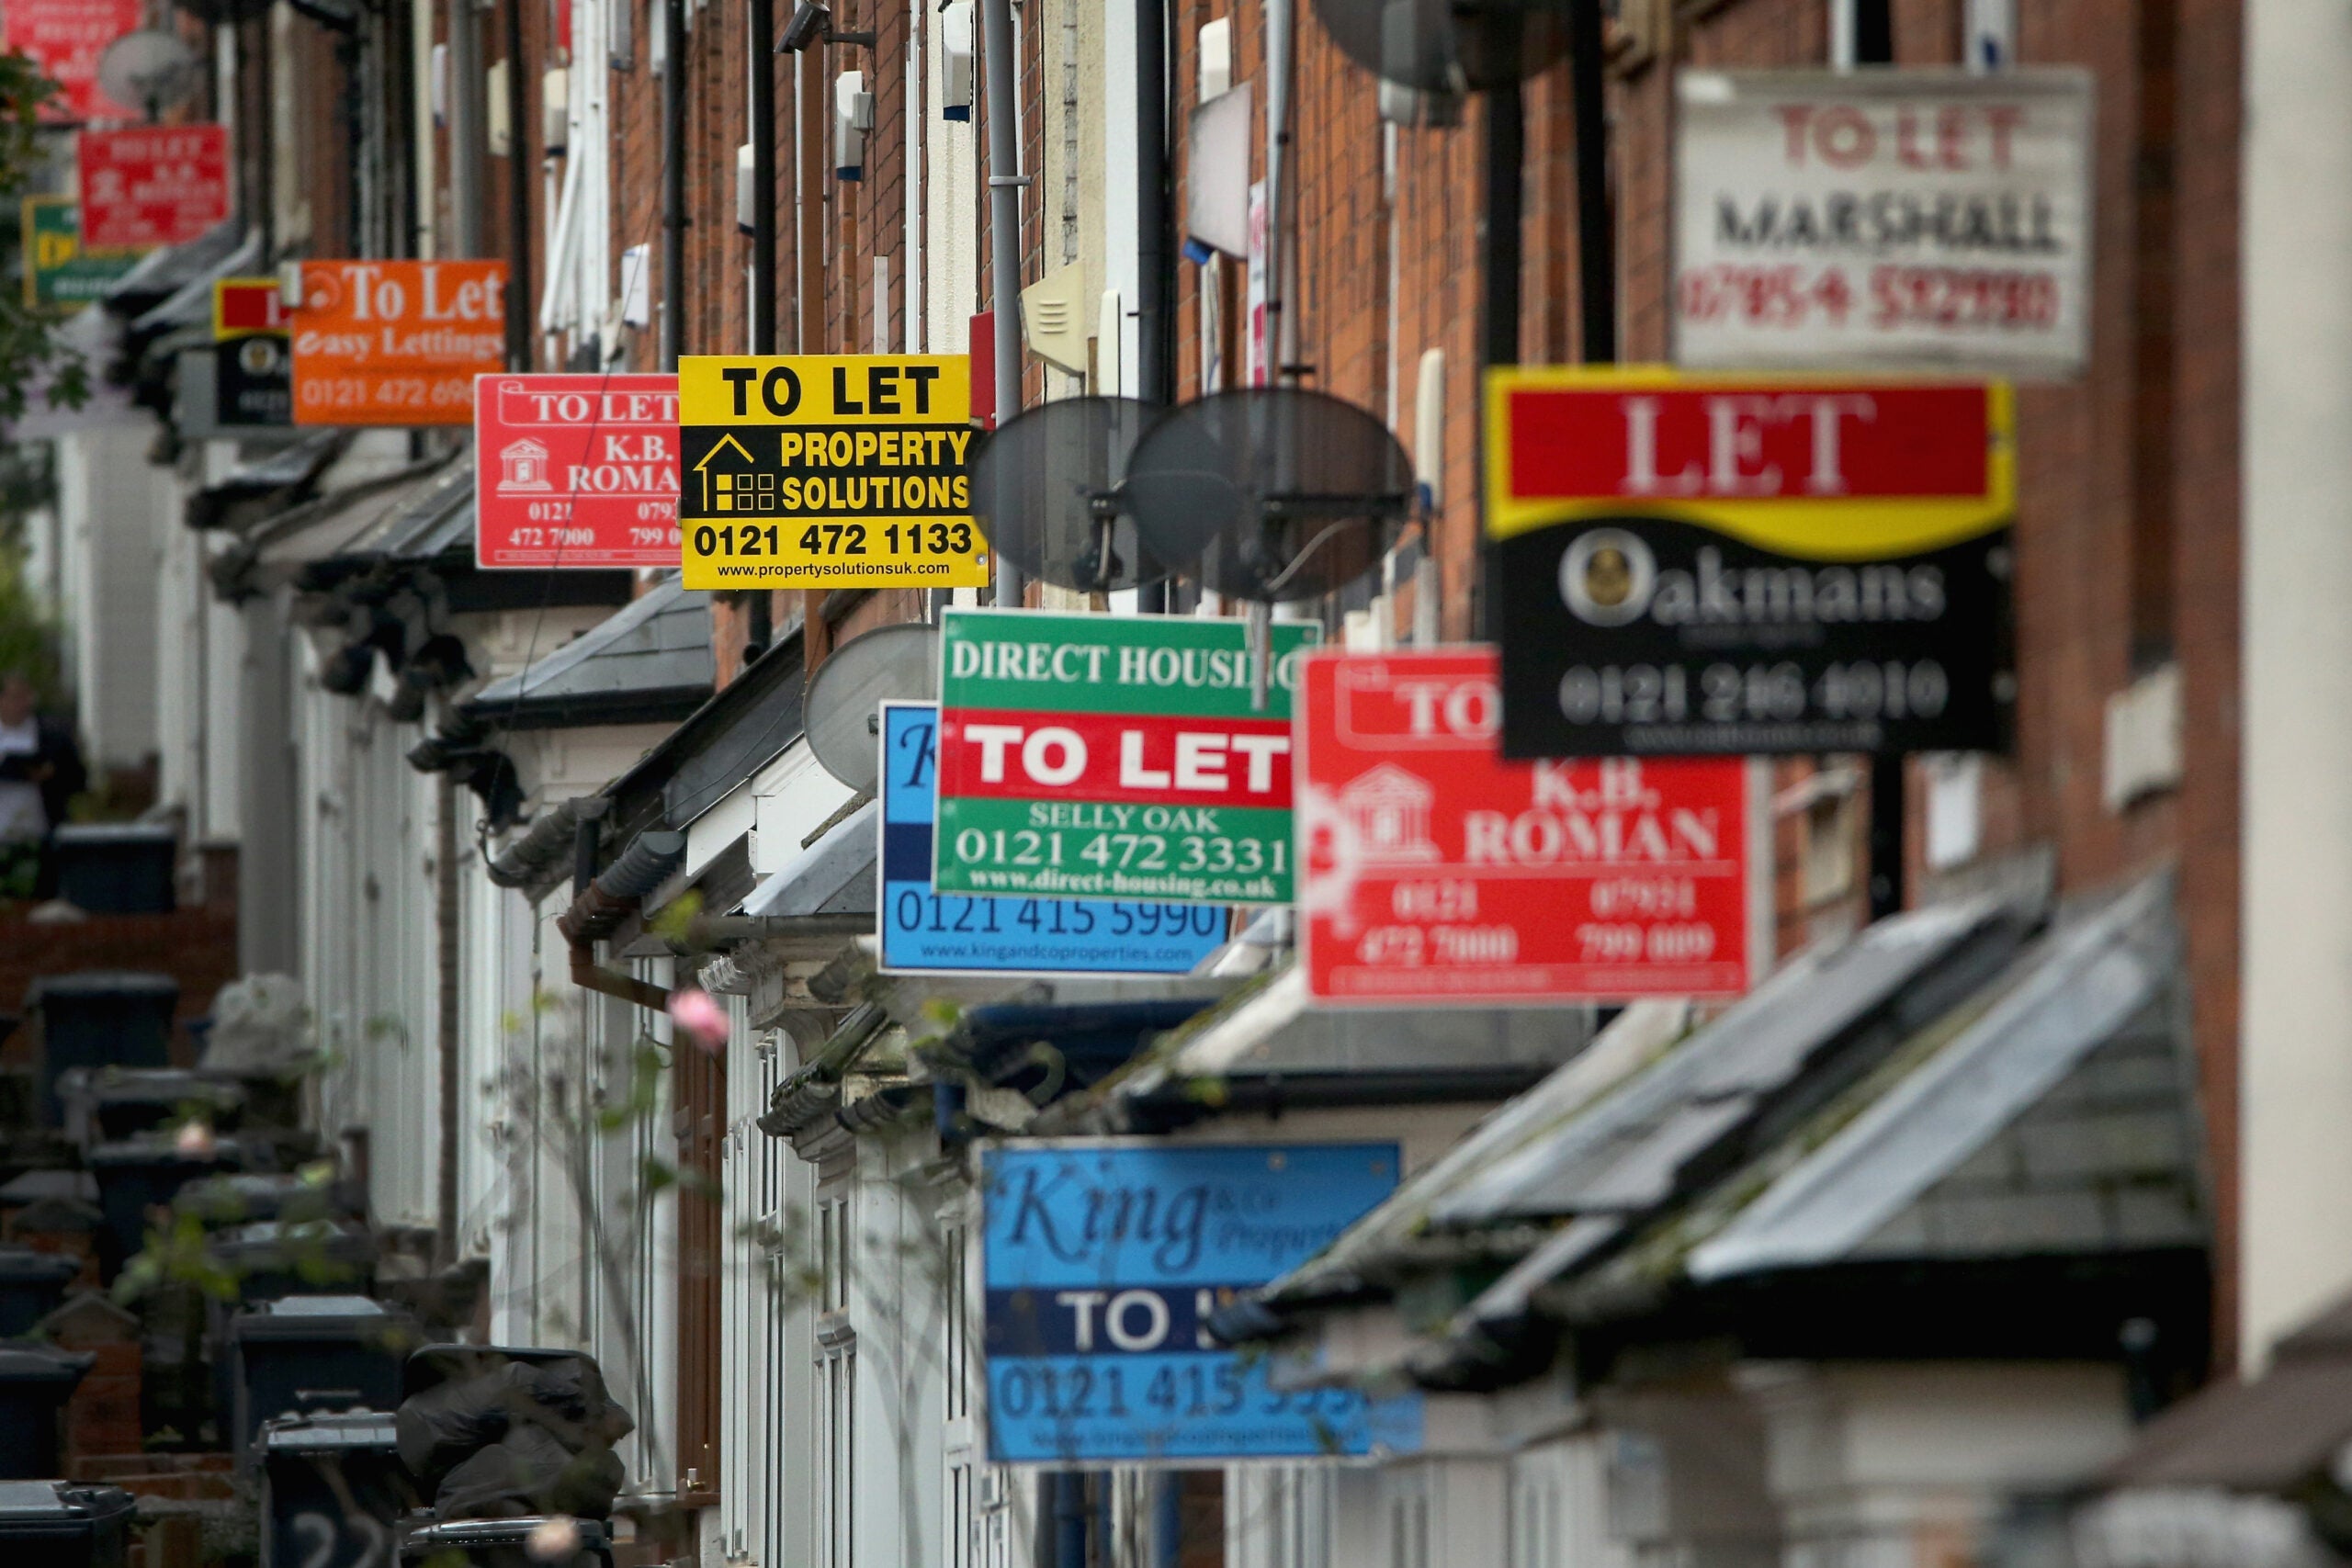 A Sky news anchor asked me why tenants deserved more rights than landlords. This is why